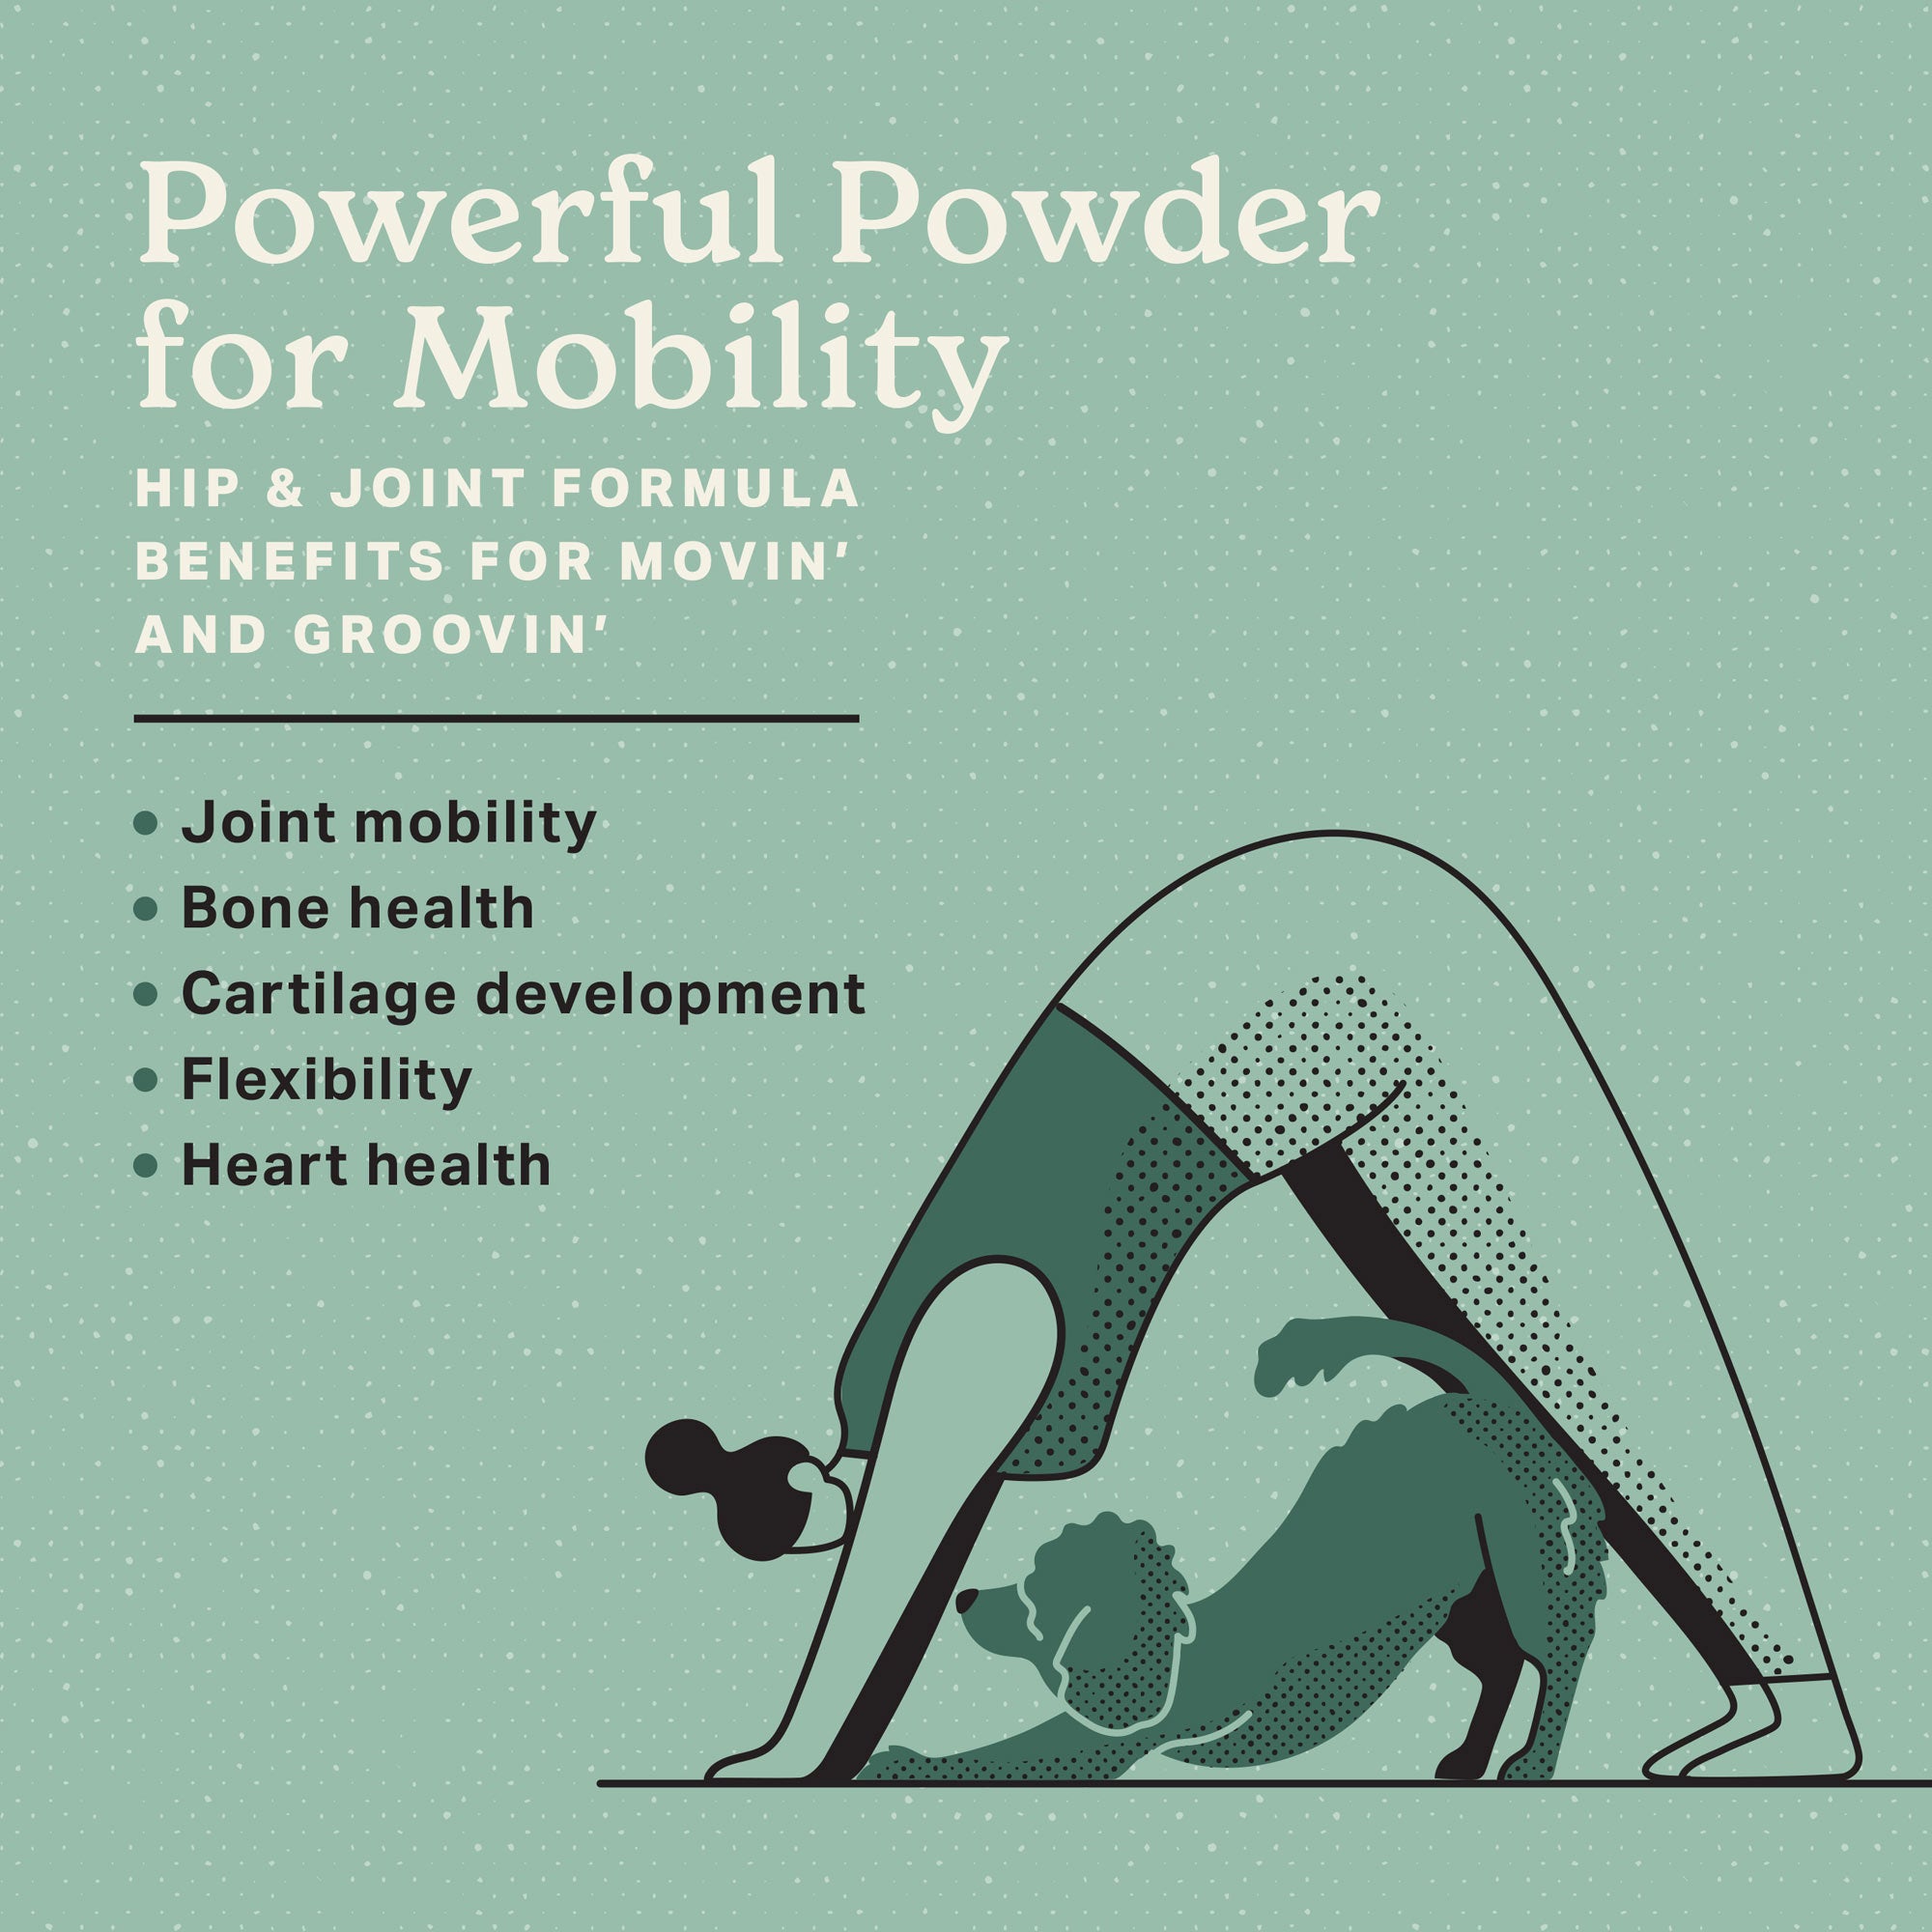 Powerful powder for mobility, hip & joint formula benefits for movin' and groovin'